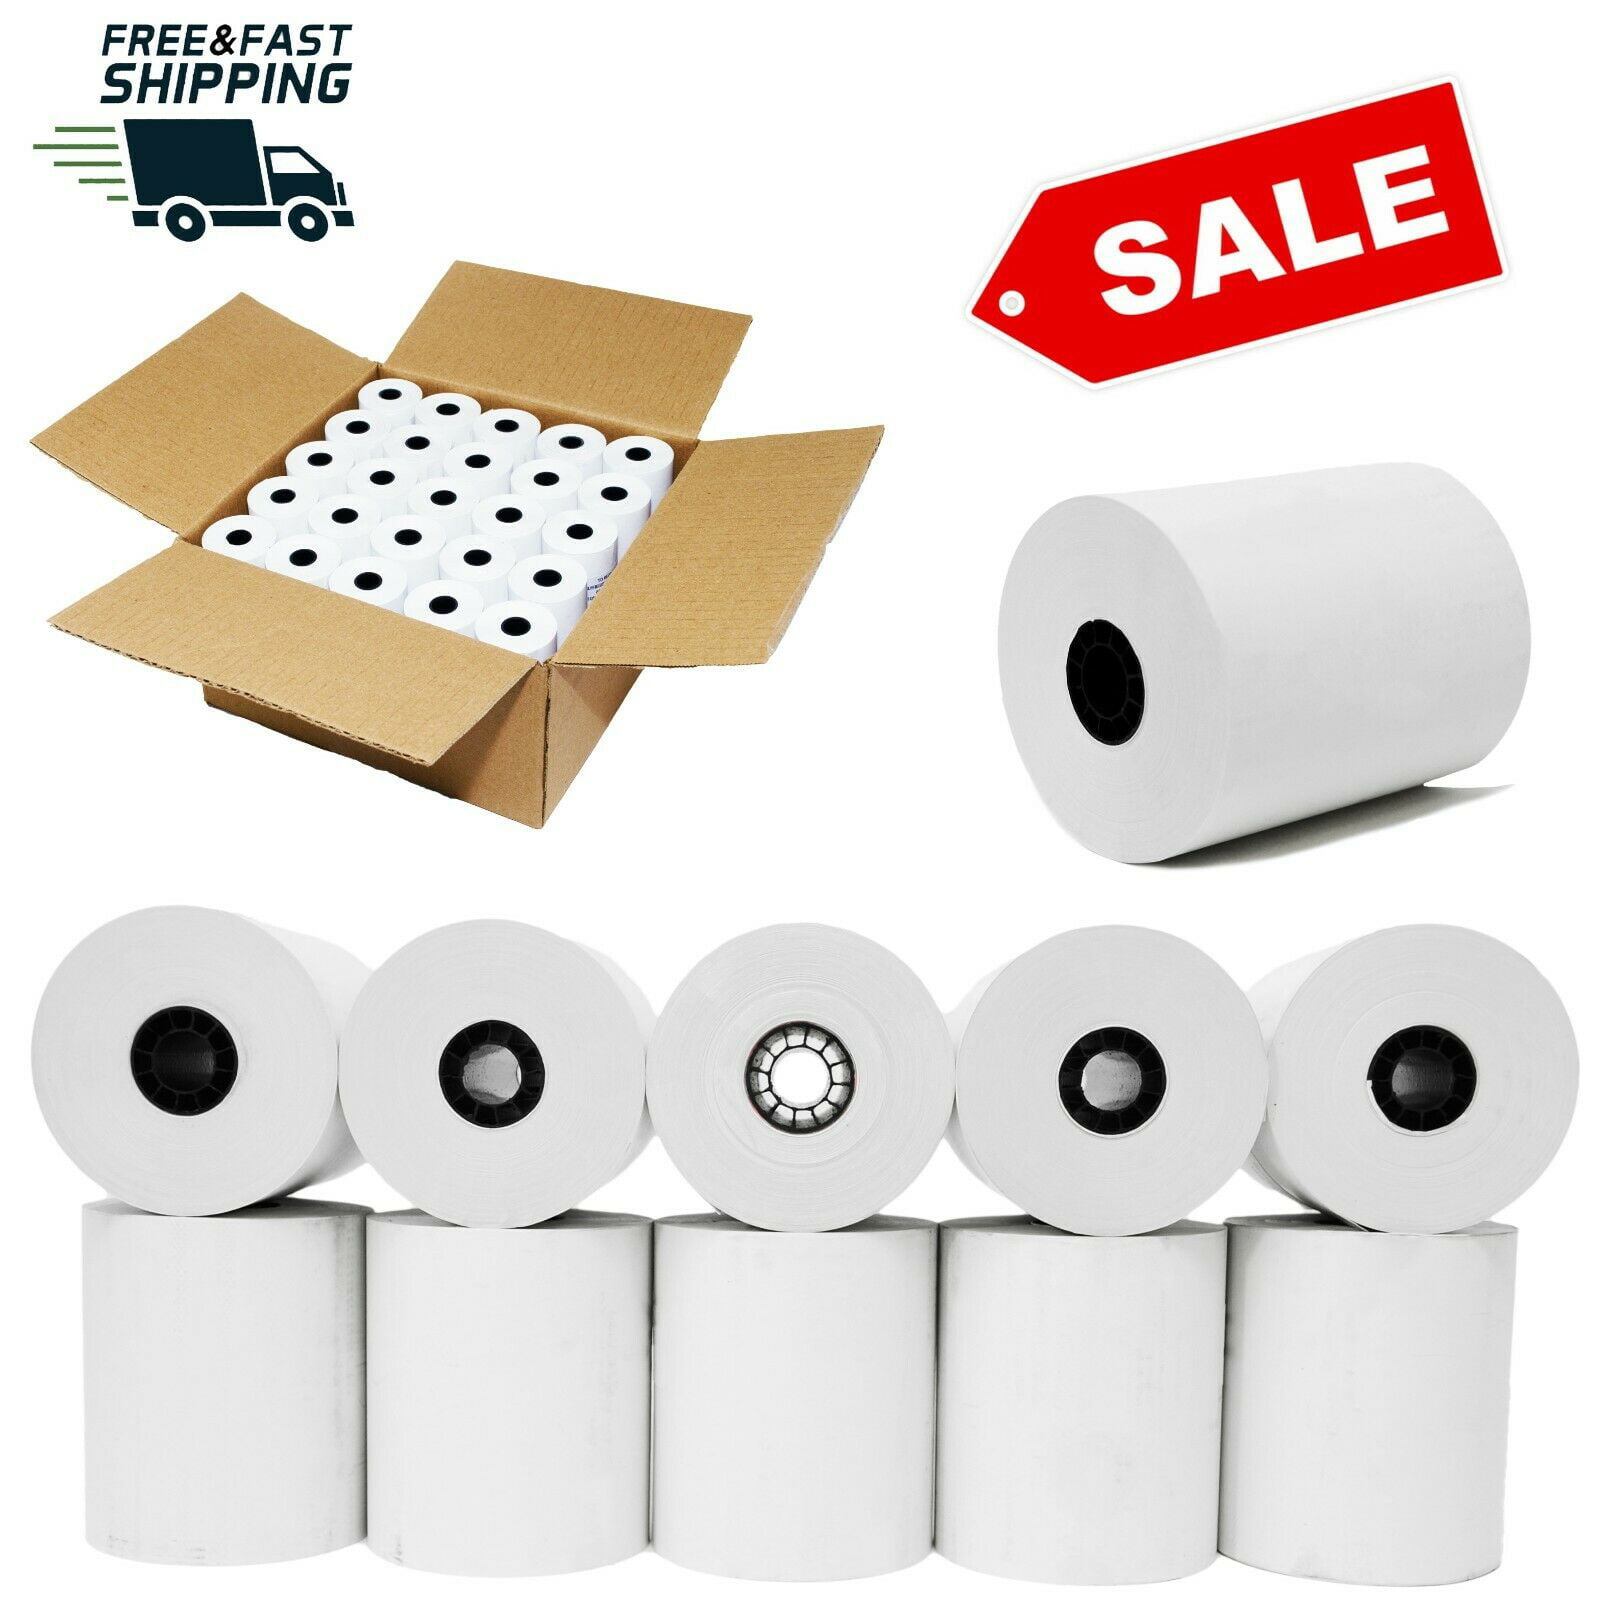 24 NEW ROLLS  ** FREE SHIPPING ** 2-1/4" x 230' THERMAL CASH REGISTER PAPER 